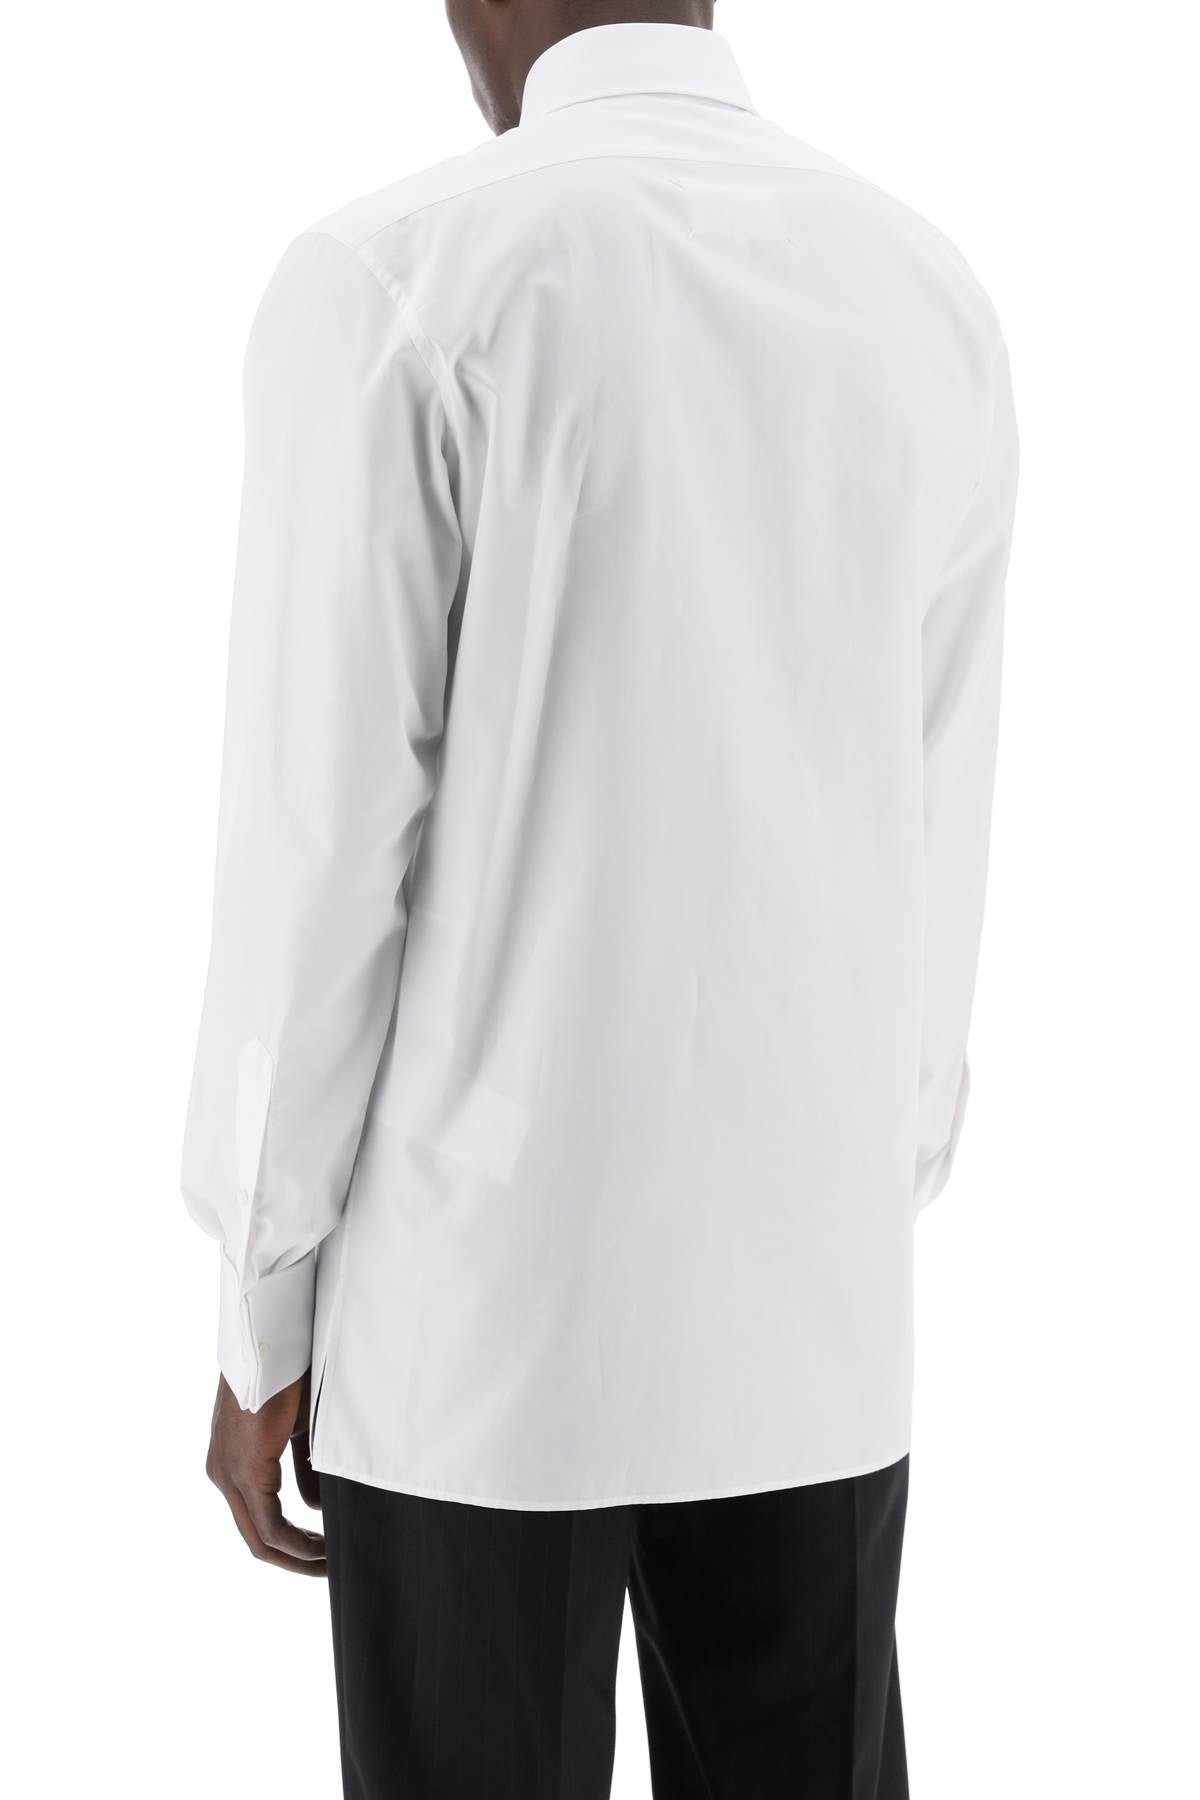 Maison margiela "shirt with pointed collar"-2